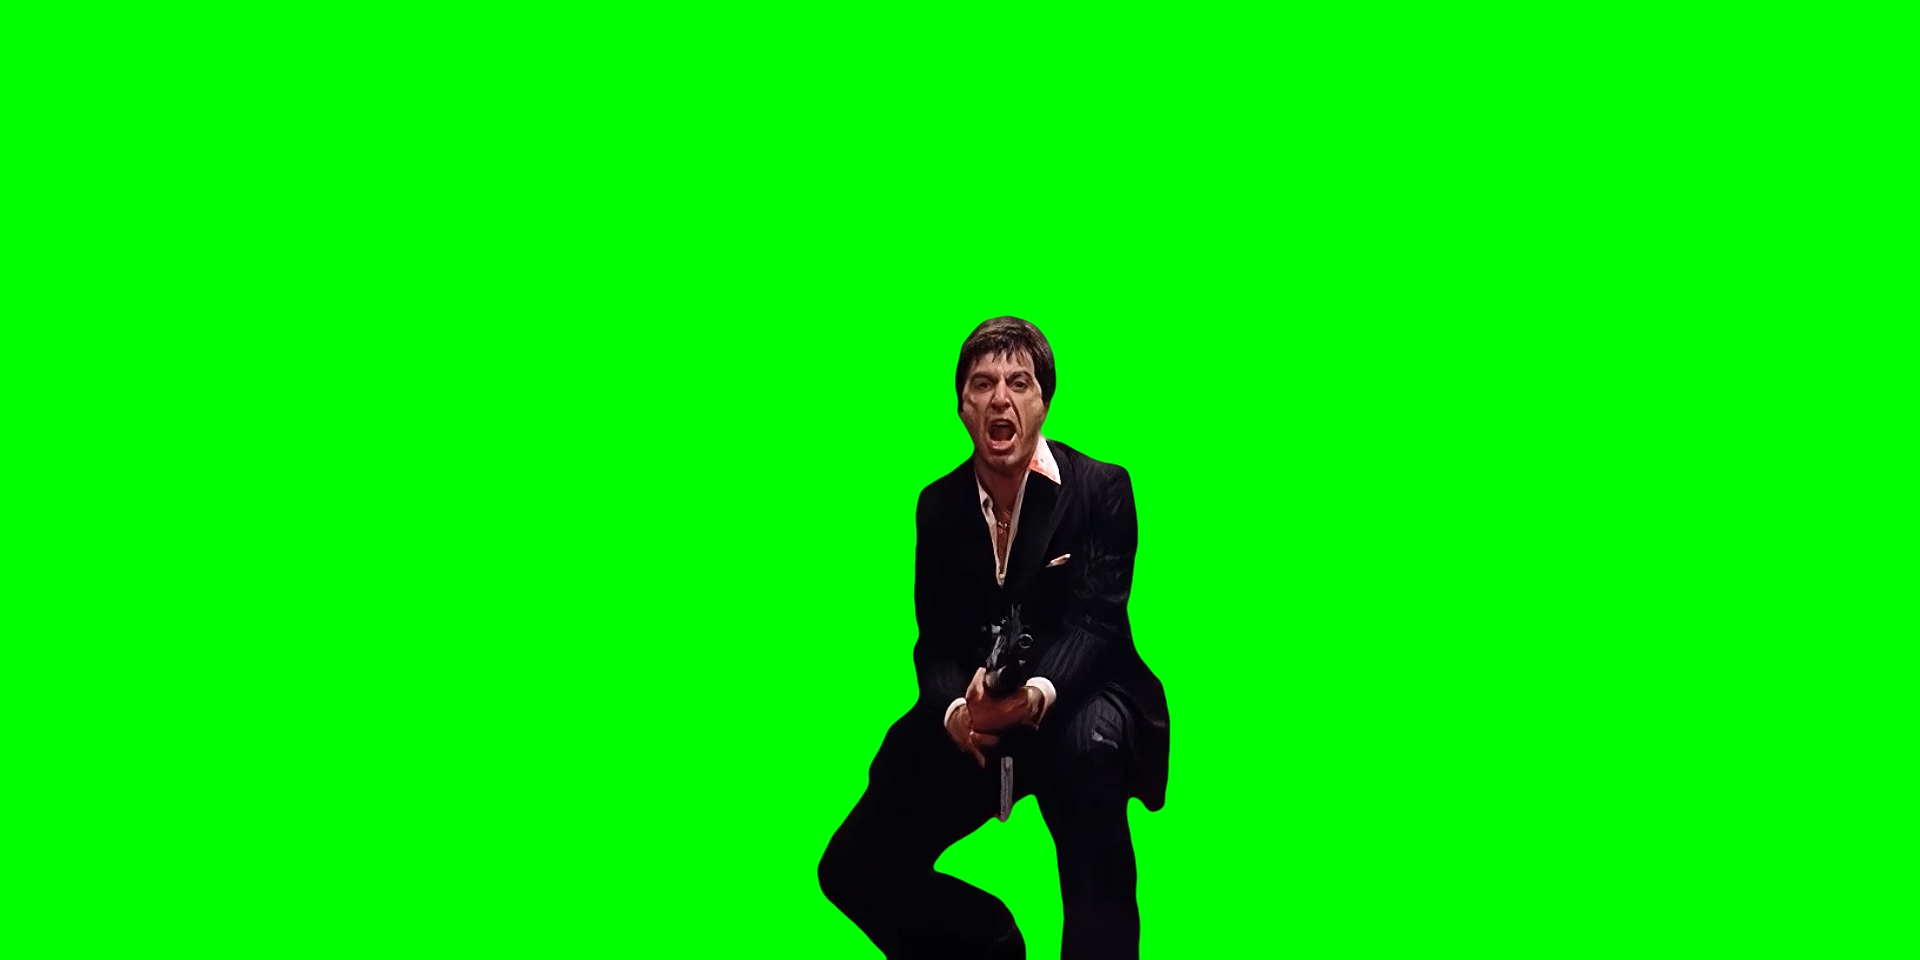 Scarface - SAY HELLO TO MY LITTLE FRIEND! meme (Green Screen)